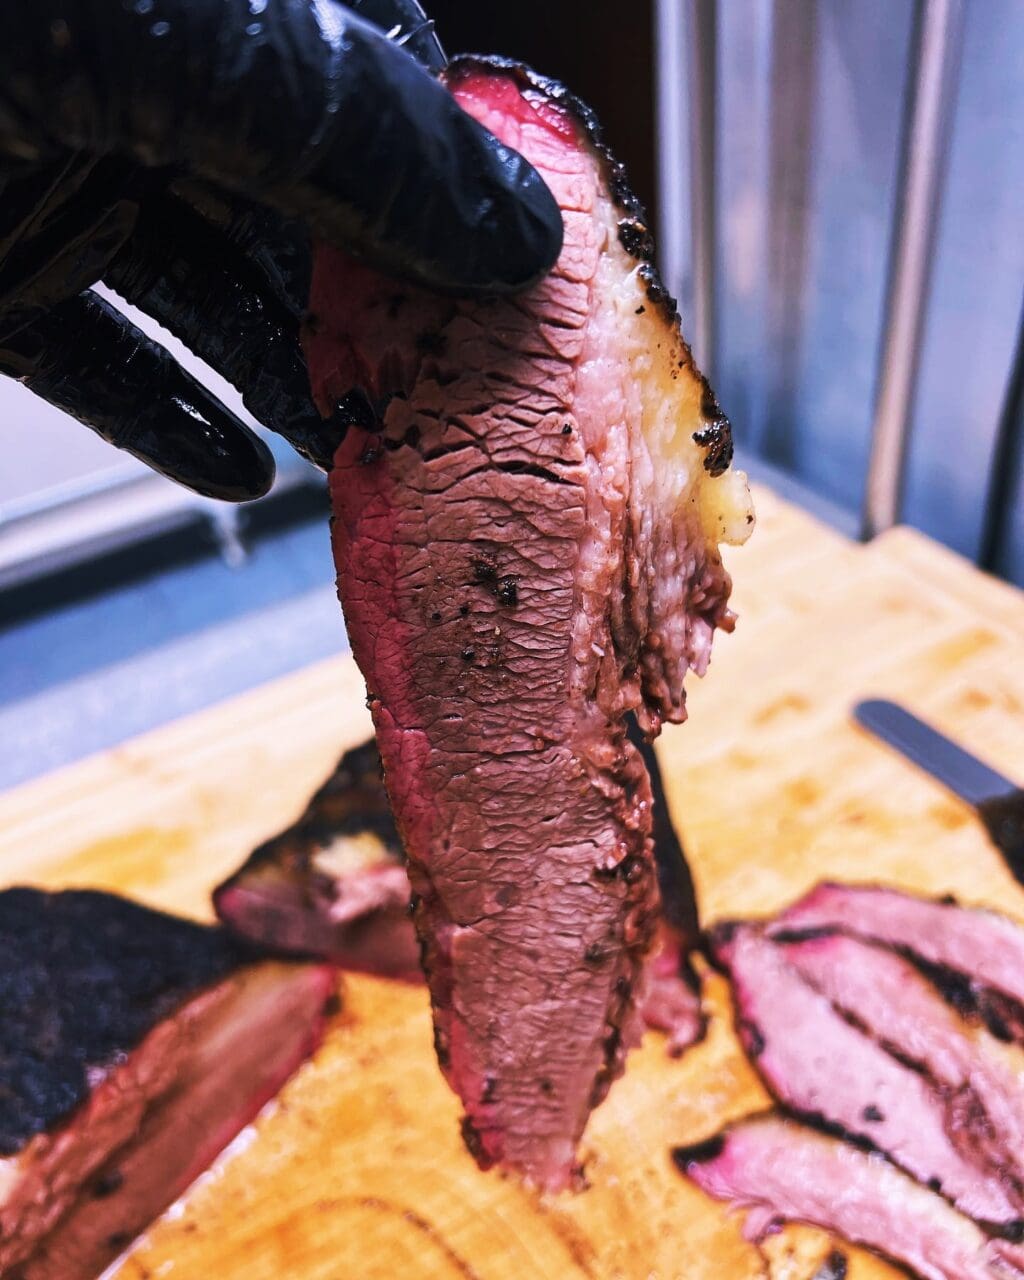 a slice of smoked brisket being held in a hand.